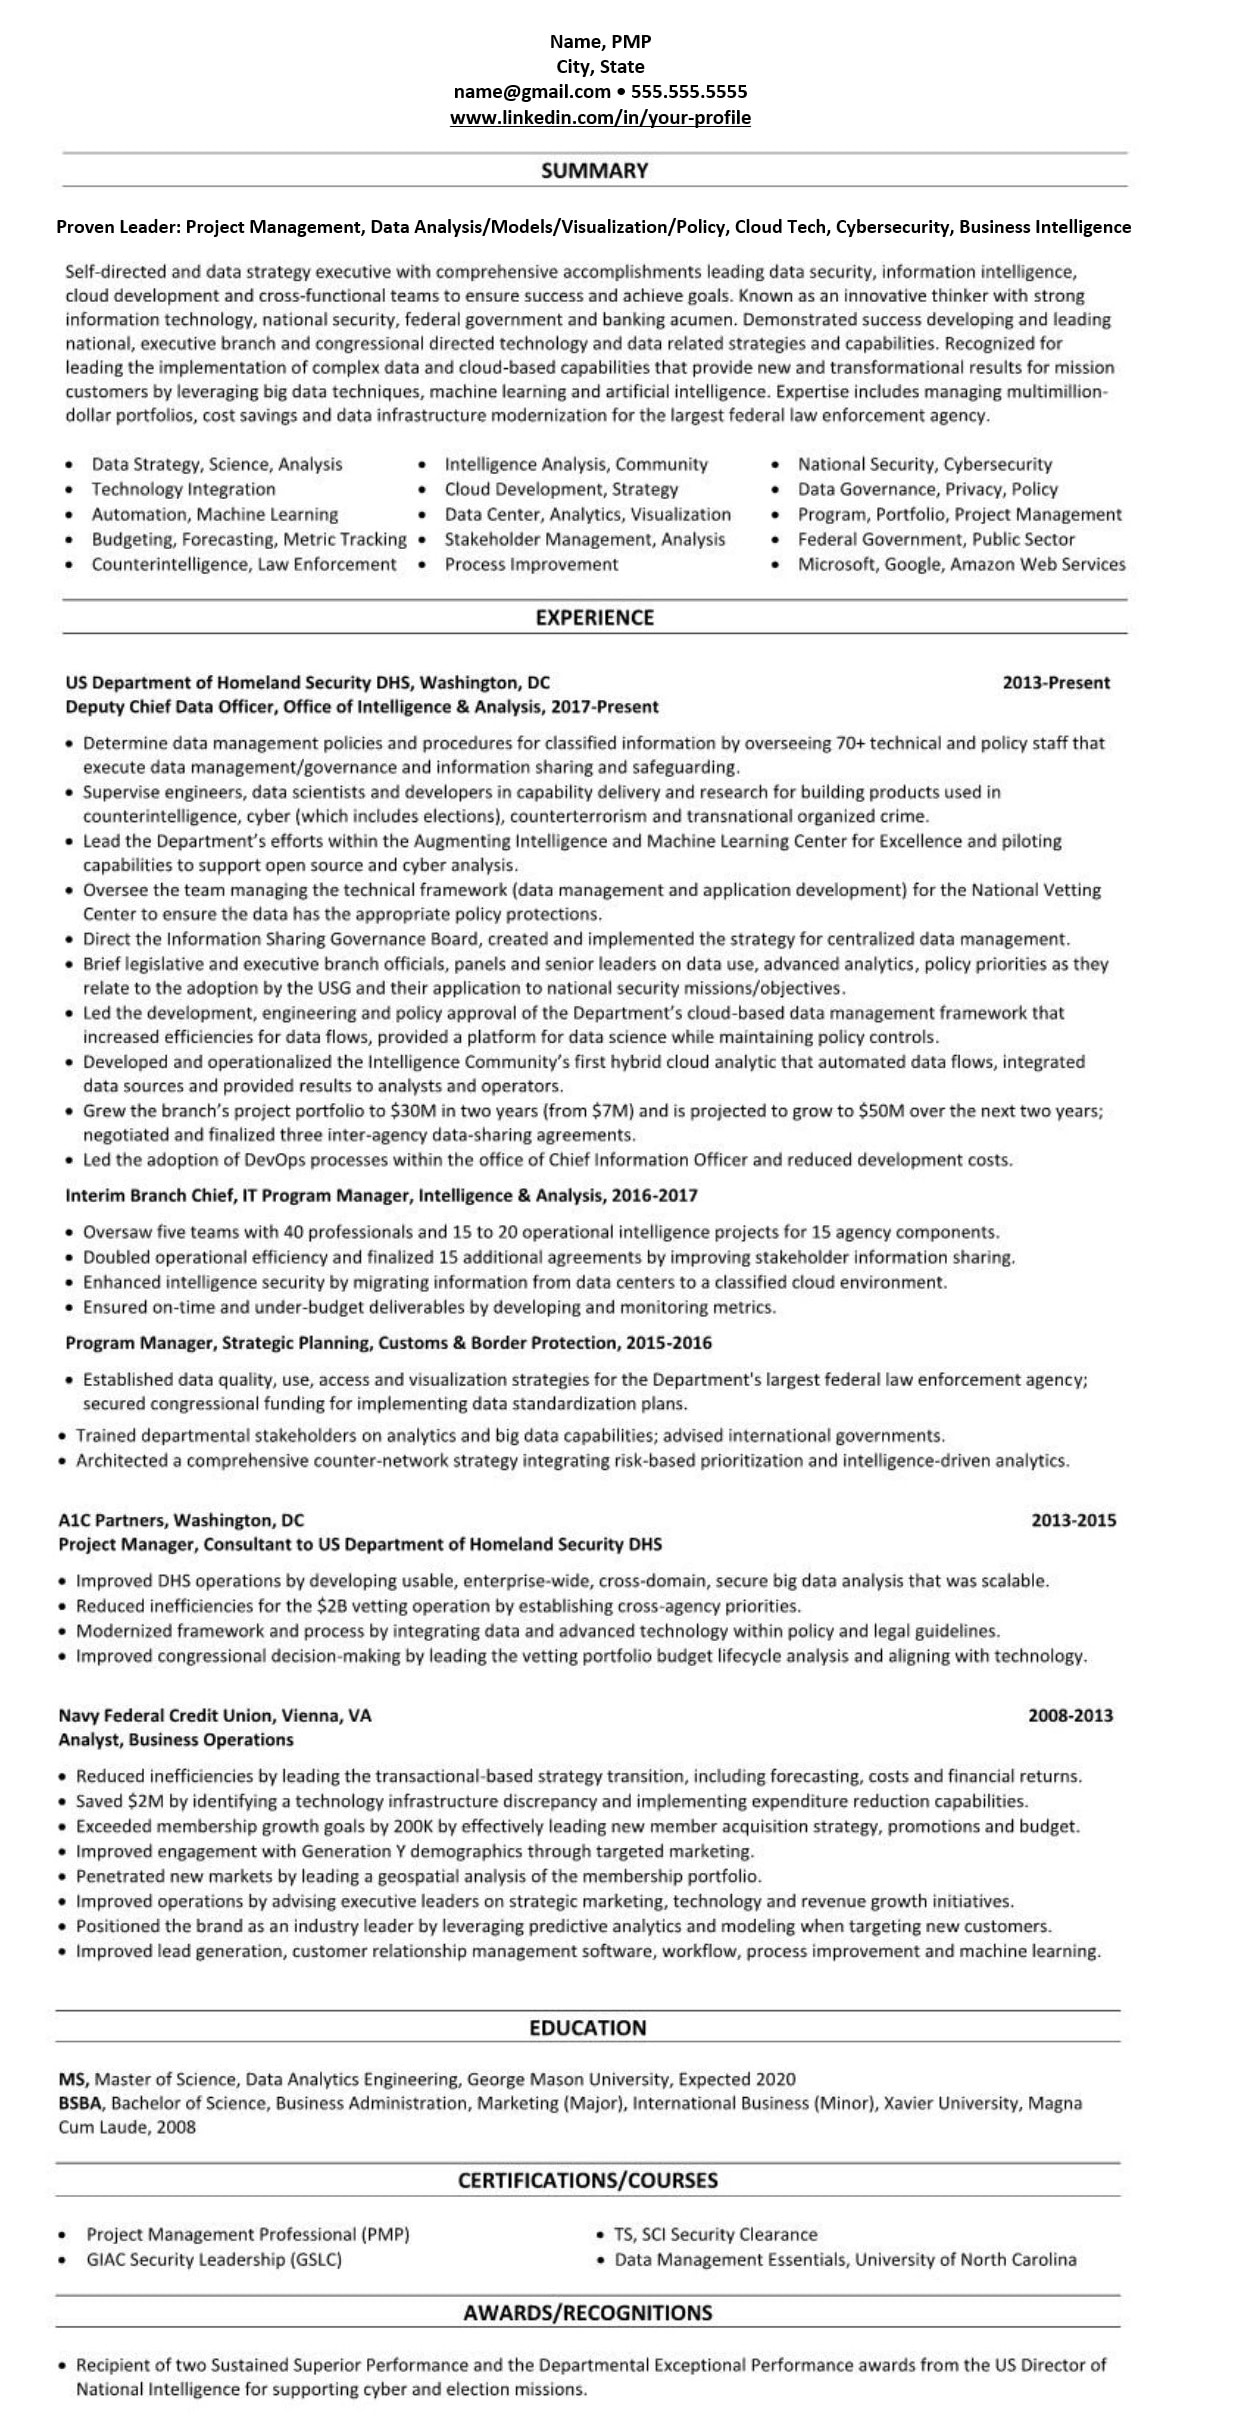 Professional Resume Example CV Project Management PMP 2665